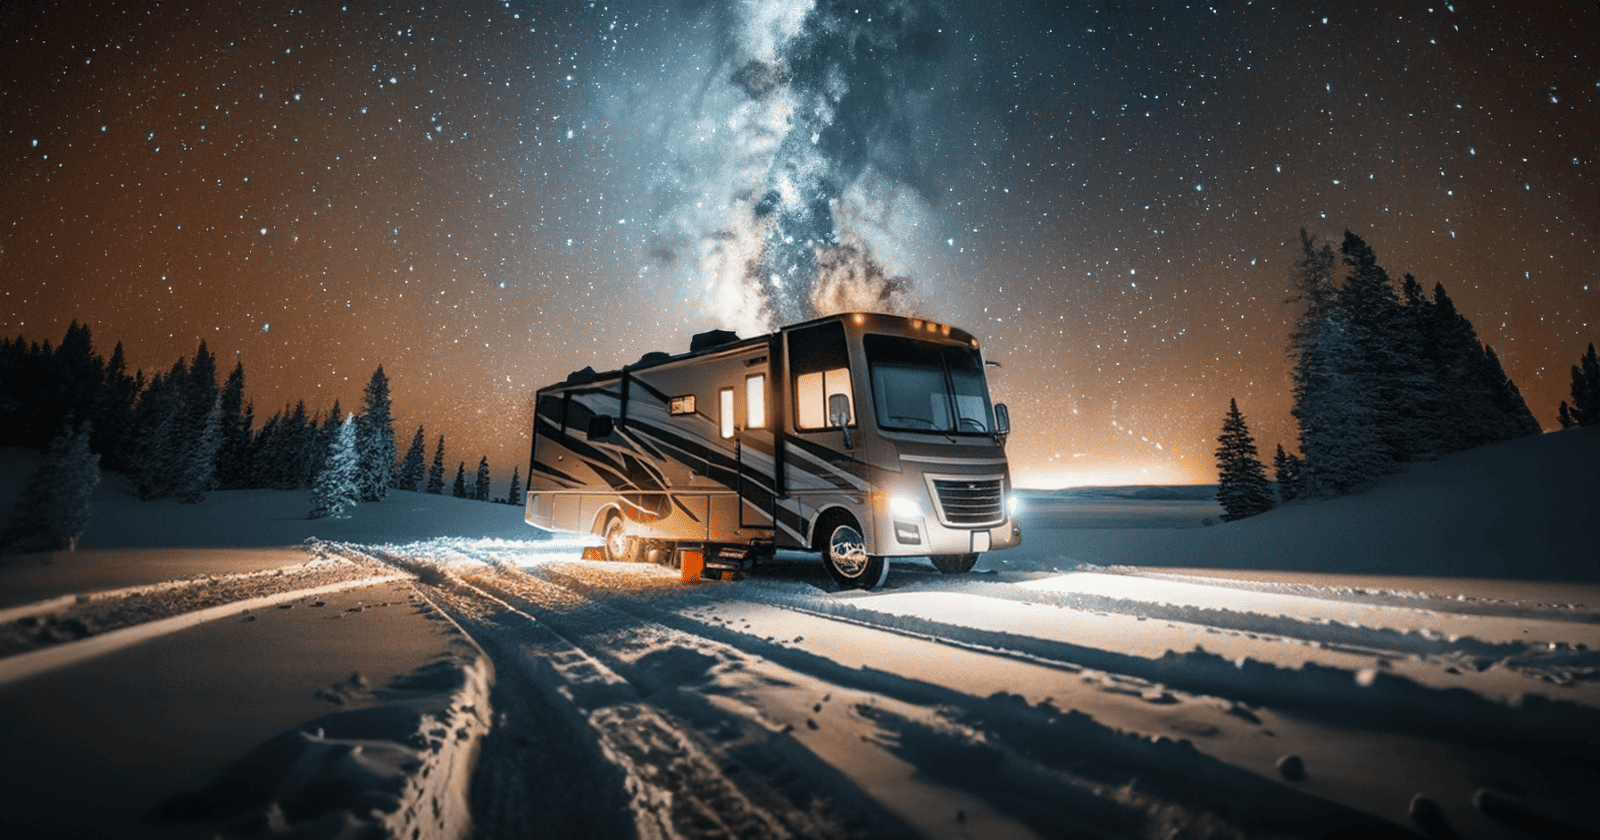 An RV parked amidst a snowy landscape under a breathtaking starlit sky with the Milky Way galaxy overhead.